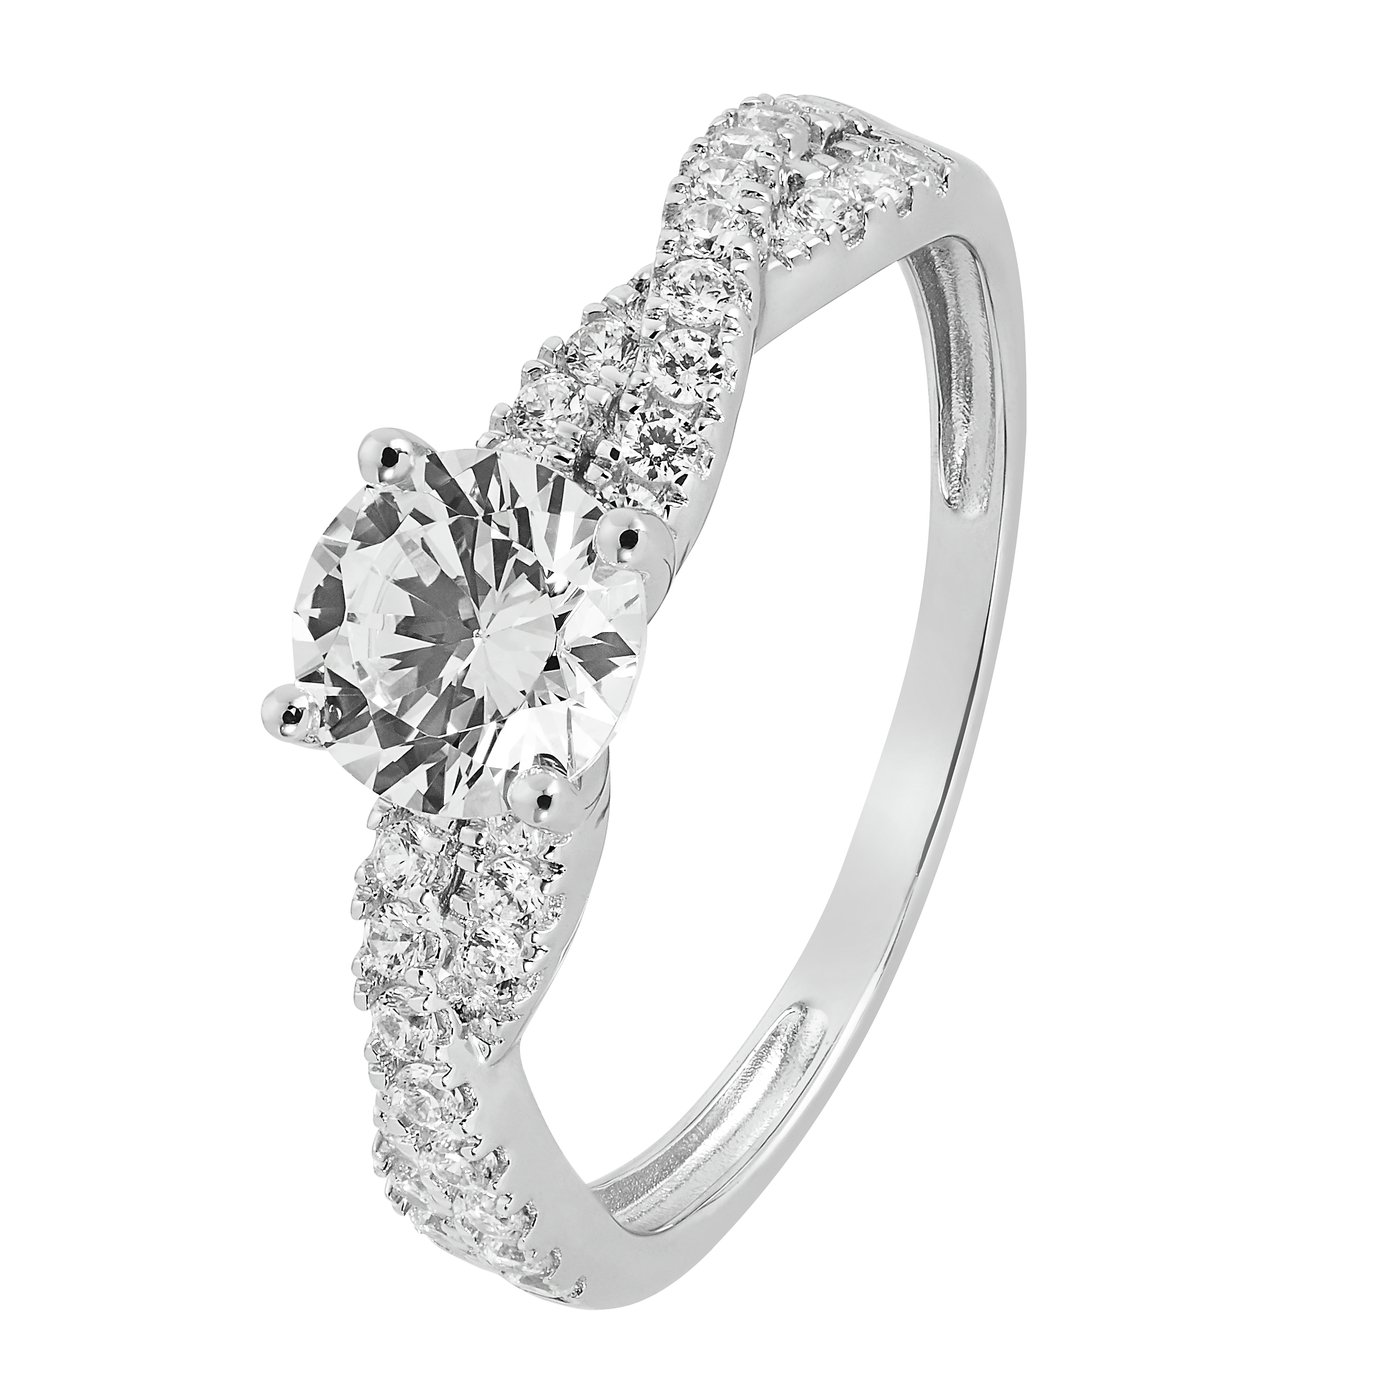 Revere 9ct White Gold Cubic Zirconia Engagement Ring - S